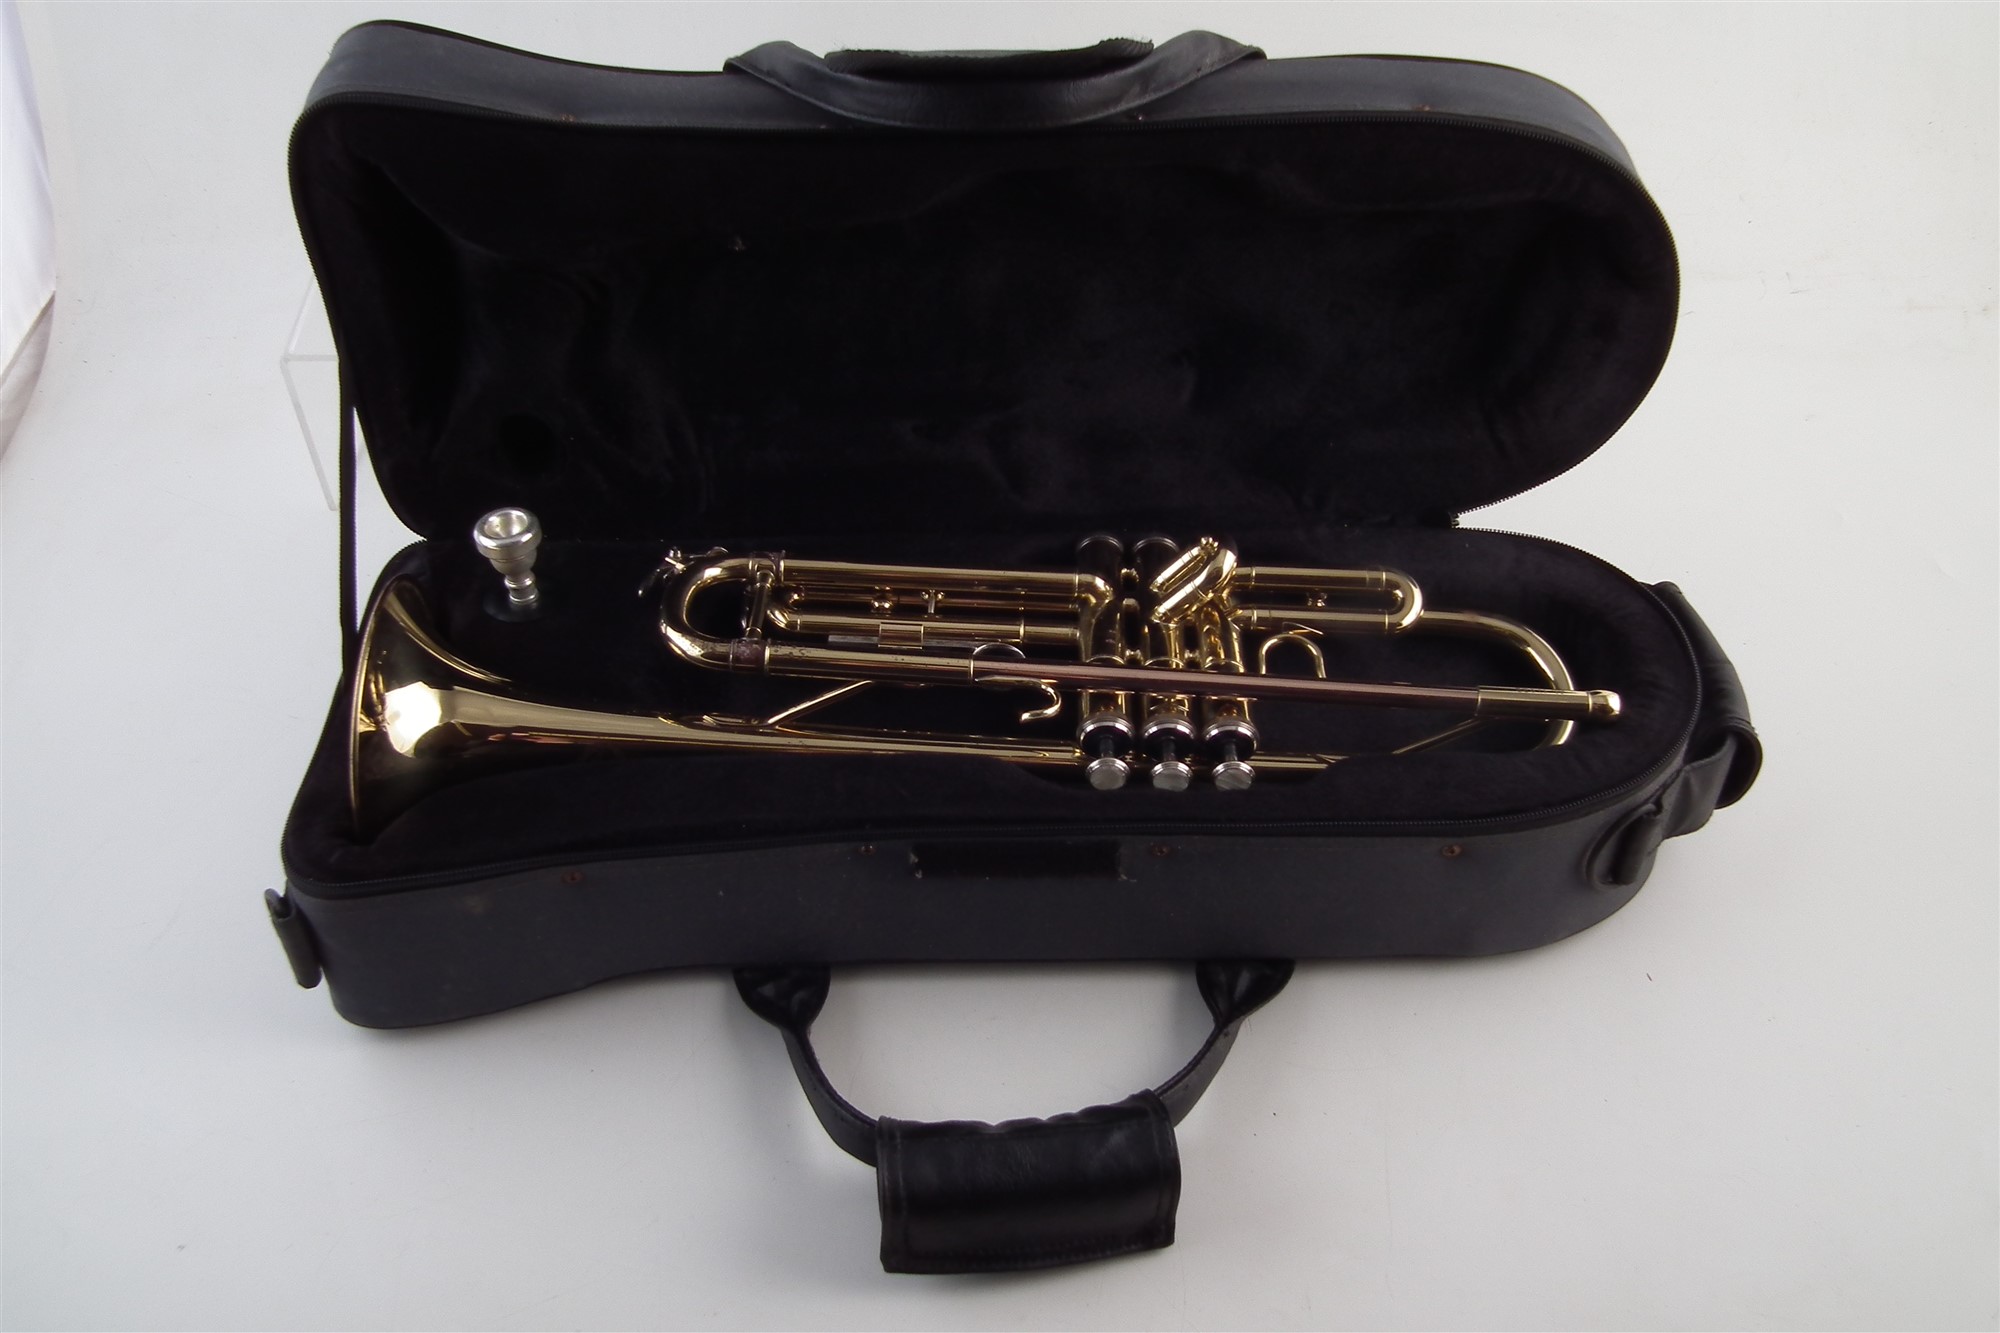 Brass trumpet by Artemis, serial number AL41022, together with padded carry case which measures 56cm - Image 6 of 6